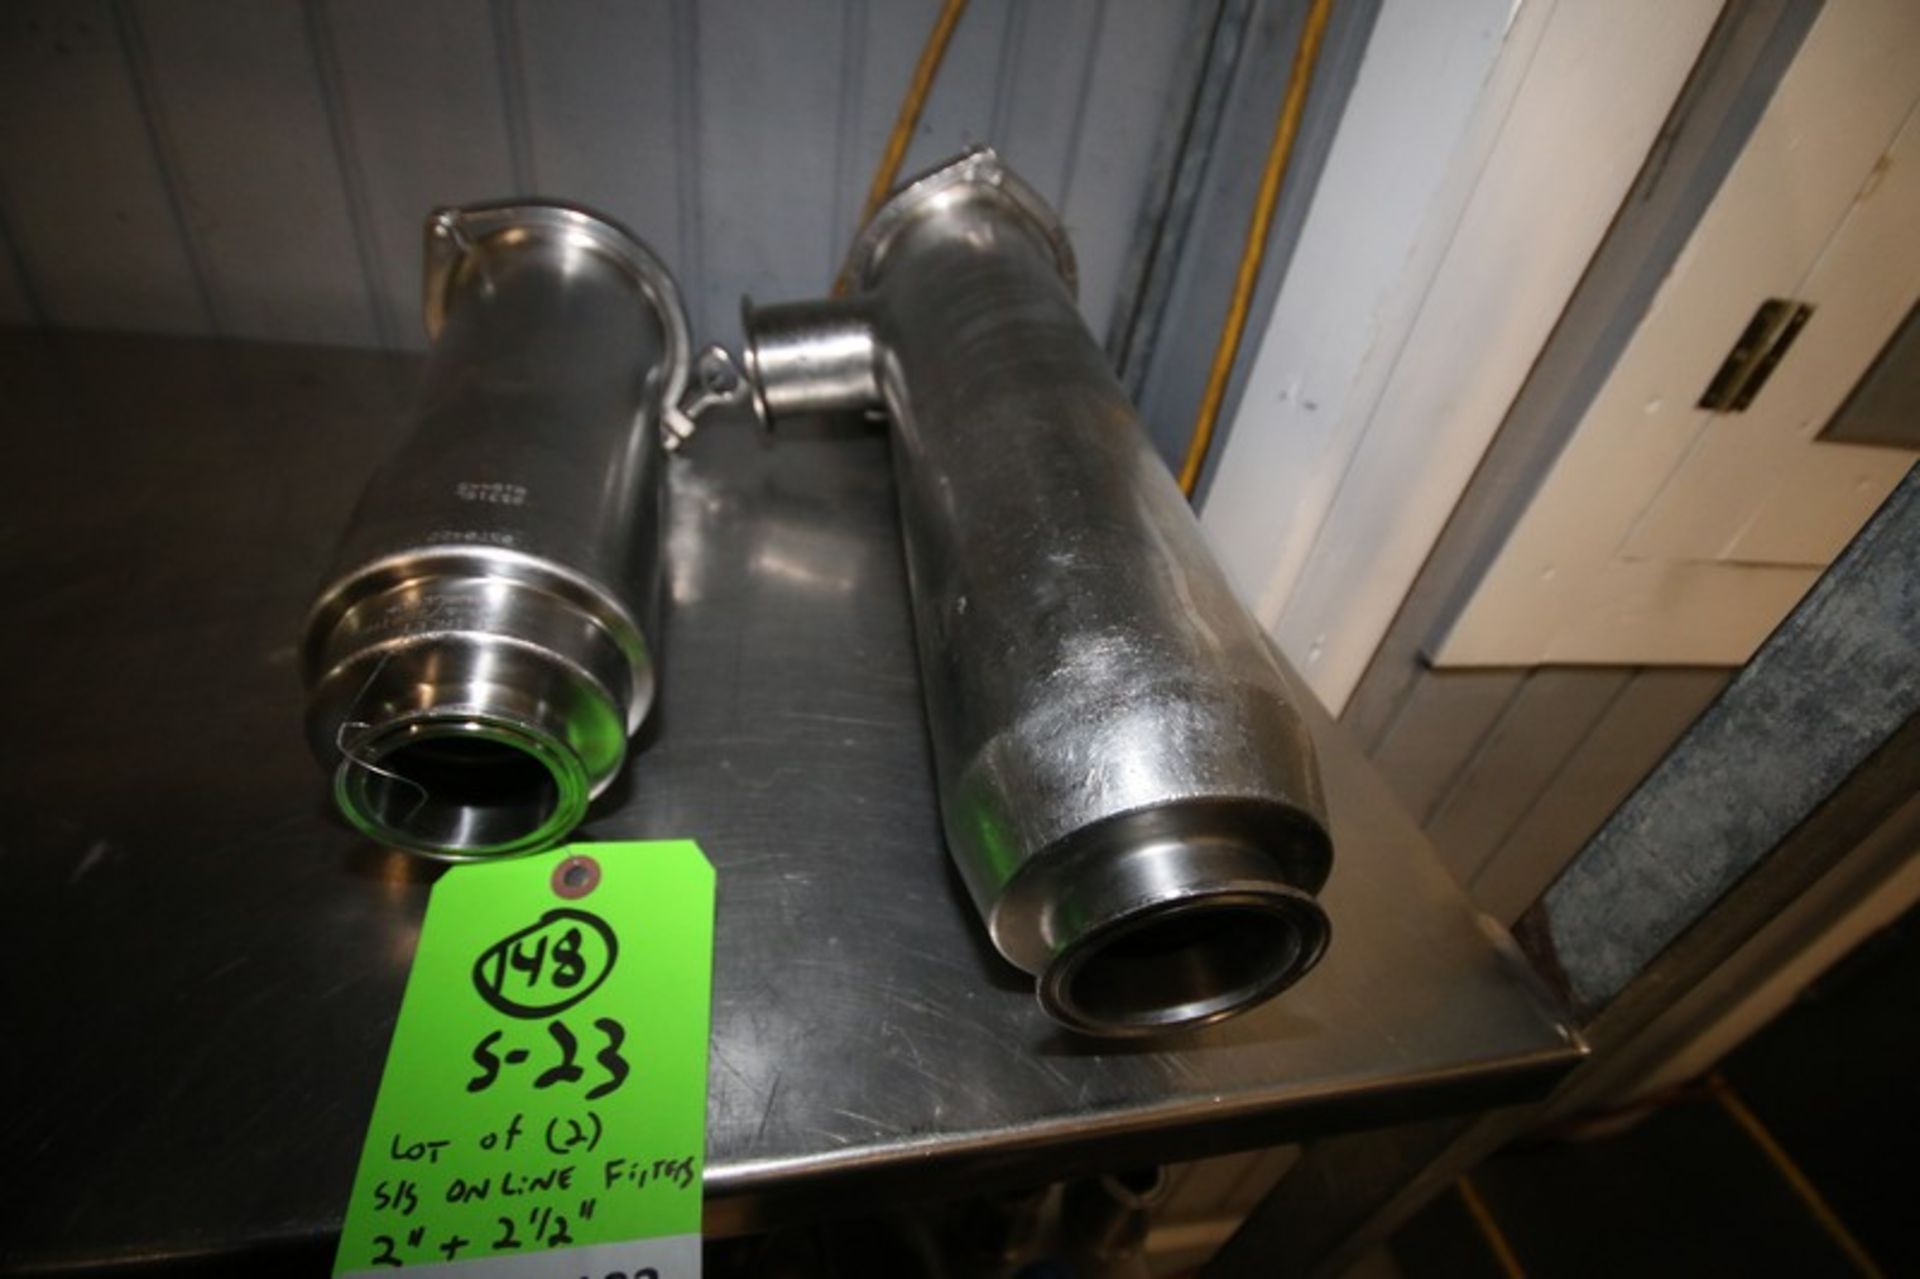 Lot of (2) 2" & 2.5" S/S On-Line Filters, 16" & 18" L. Clamp Type (INV#99183) (Located @ the MDG